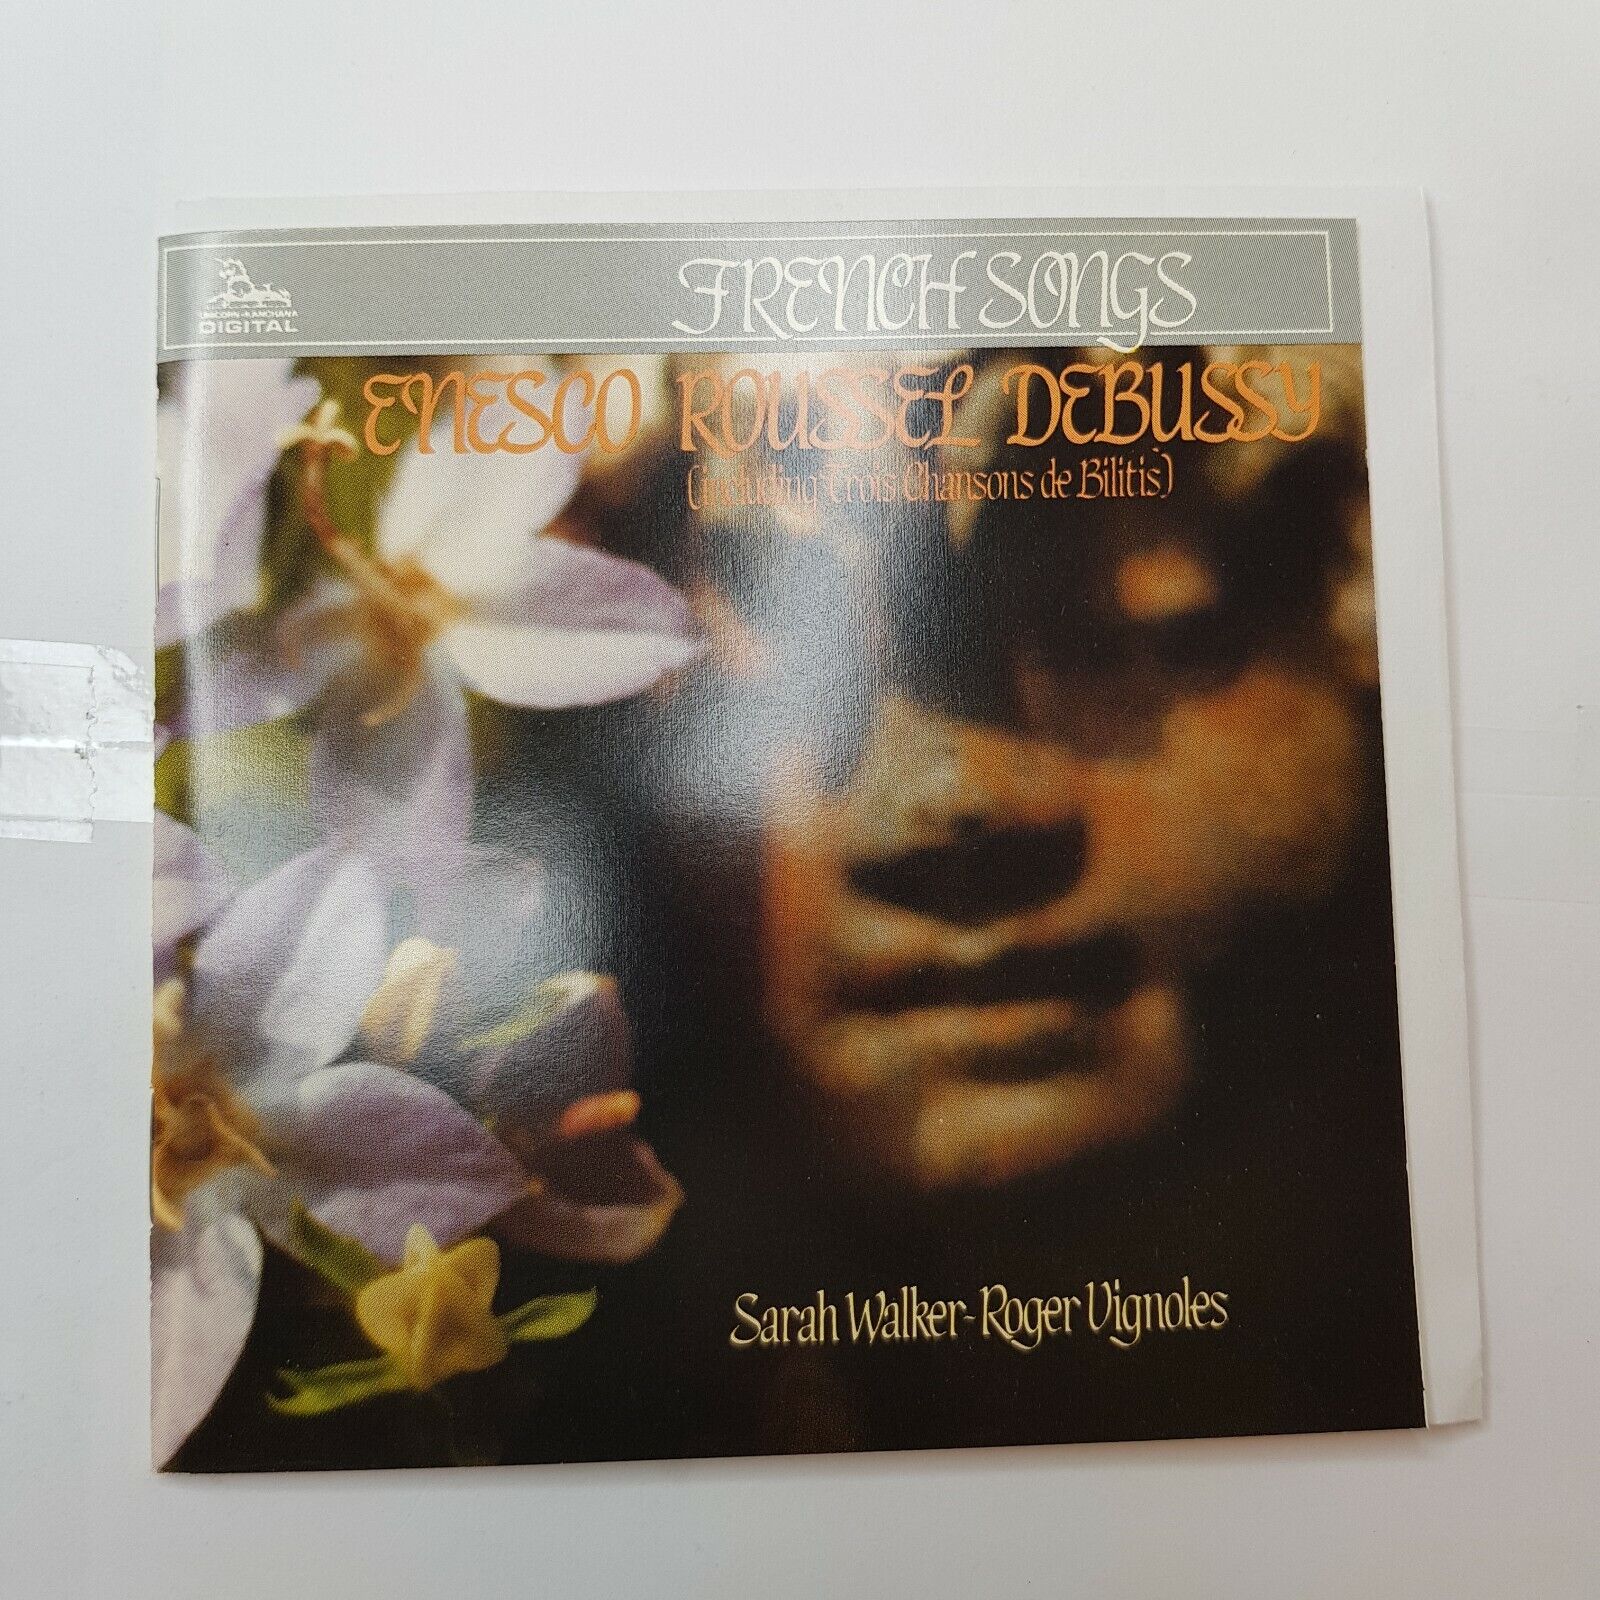 French Songs Enesco Roussel Debussy Sarah Walker-Rogers Vignoles Classical CD